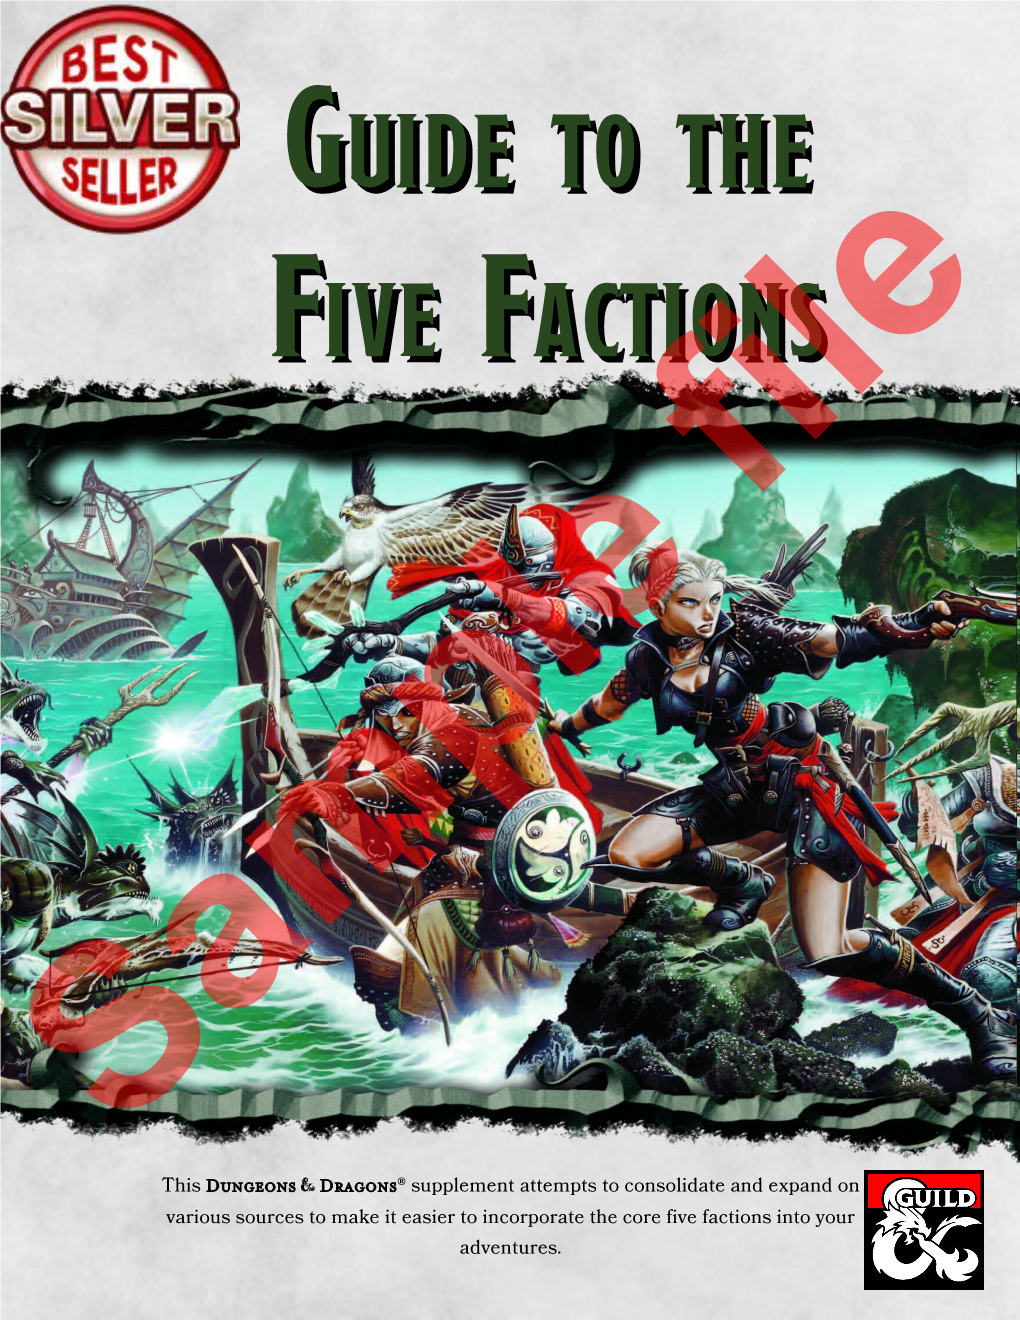 Guide to the Five Factions